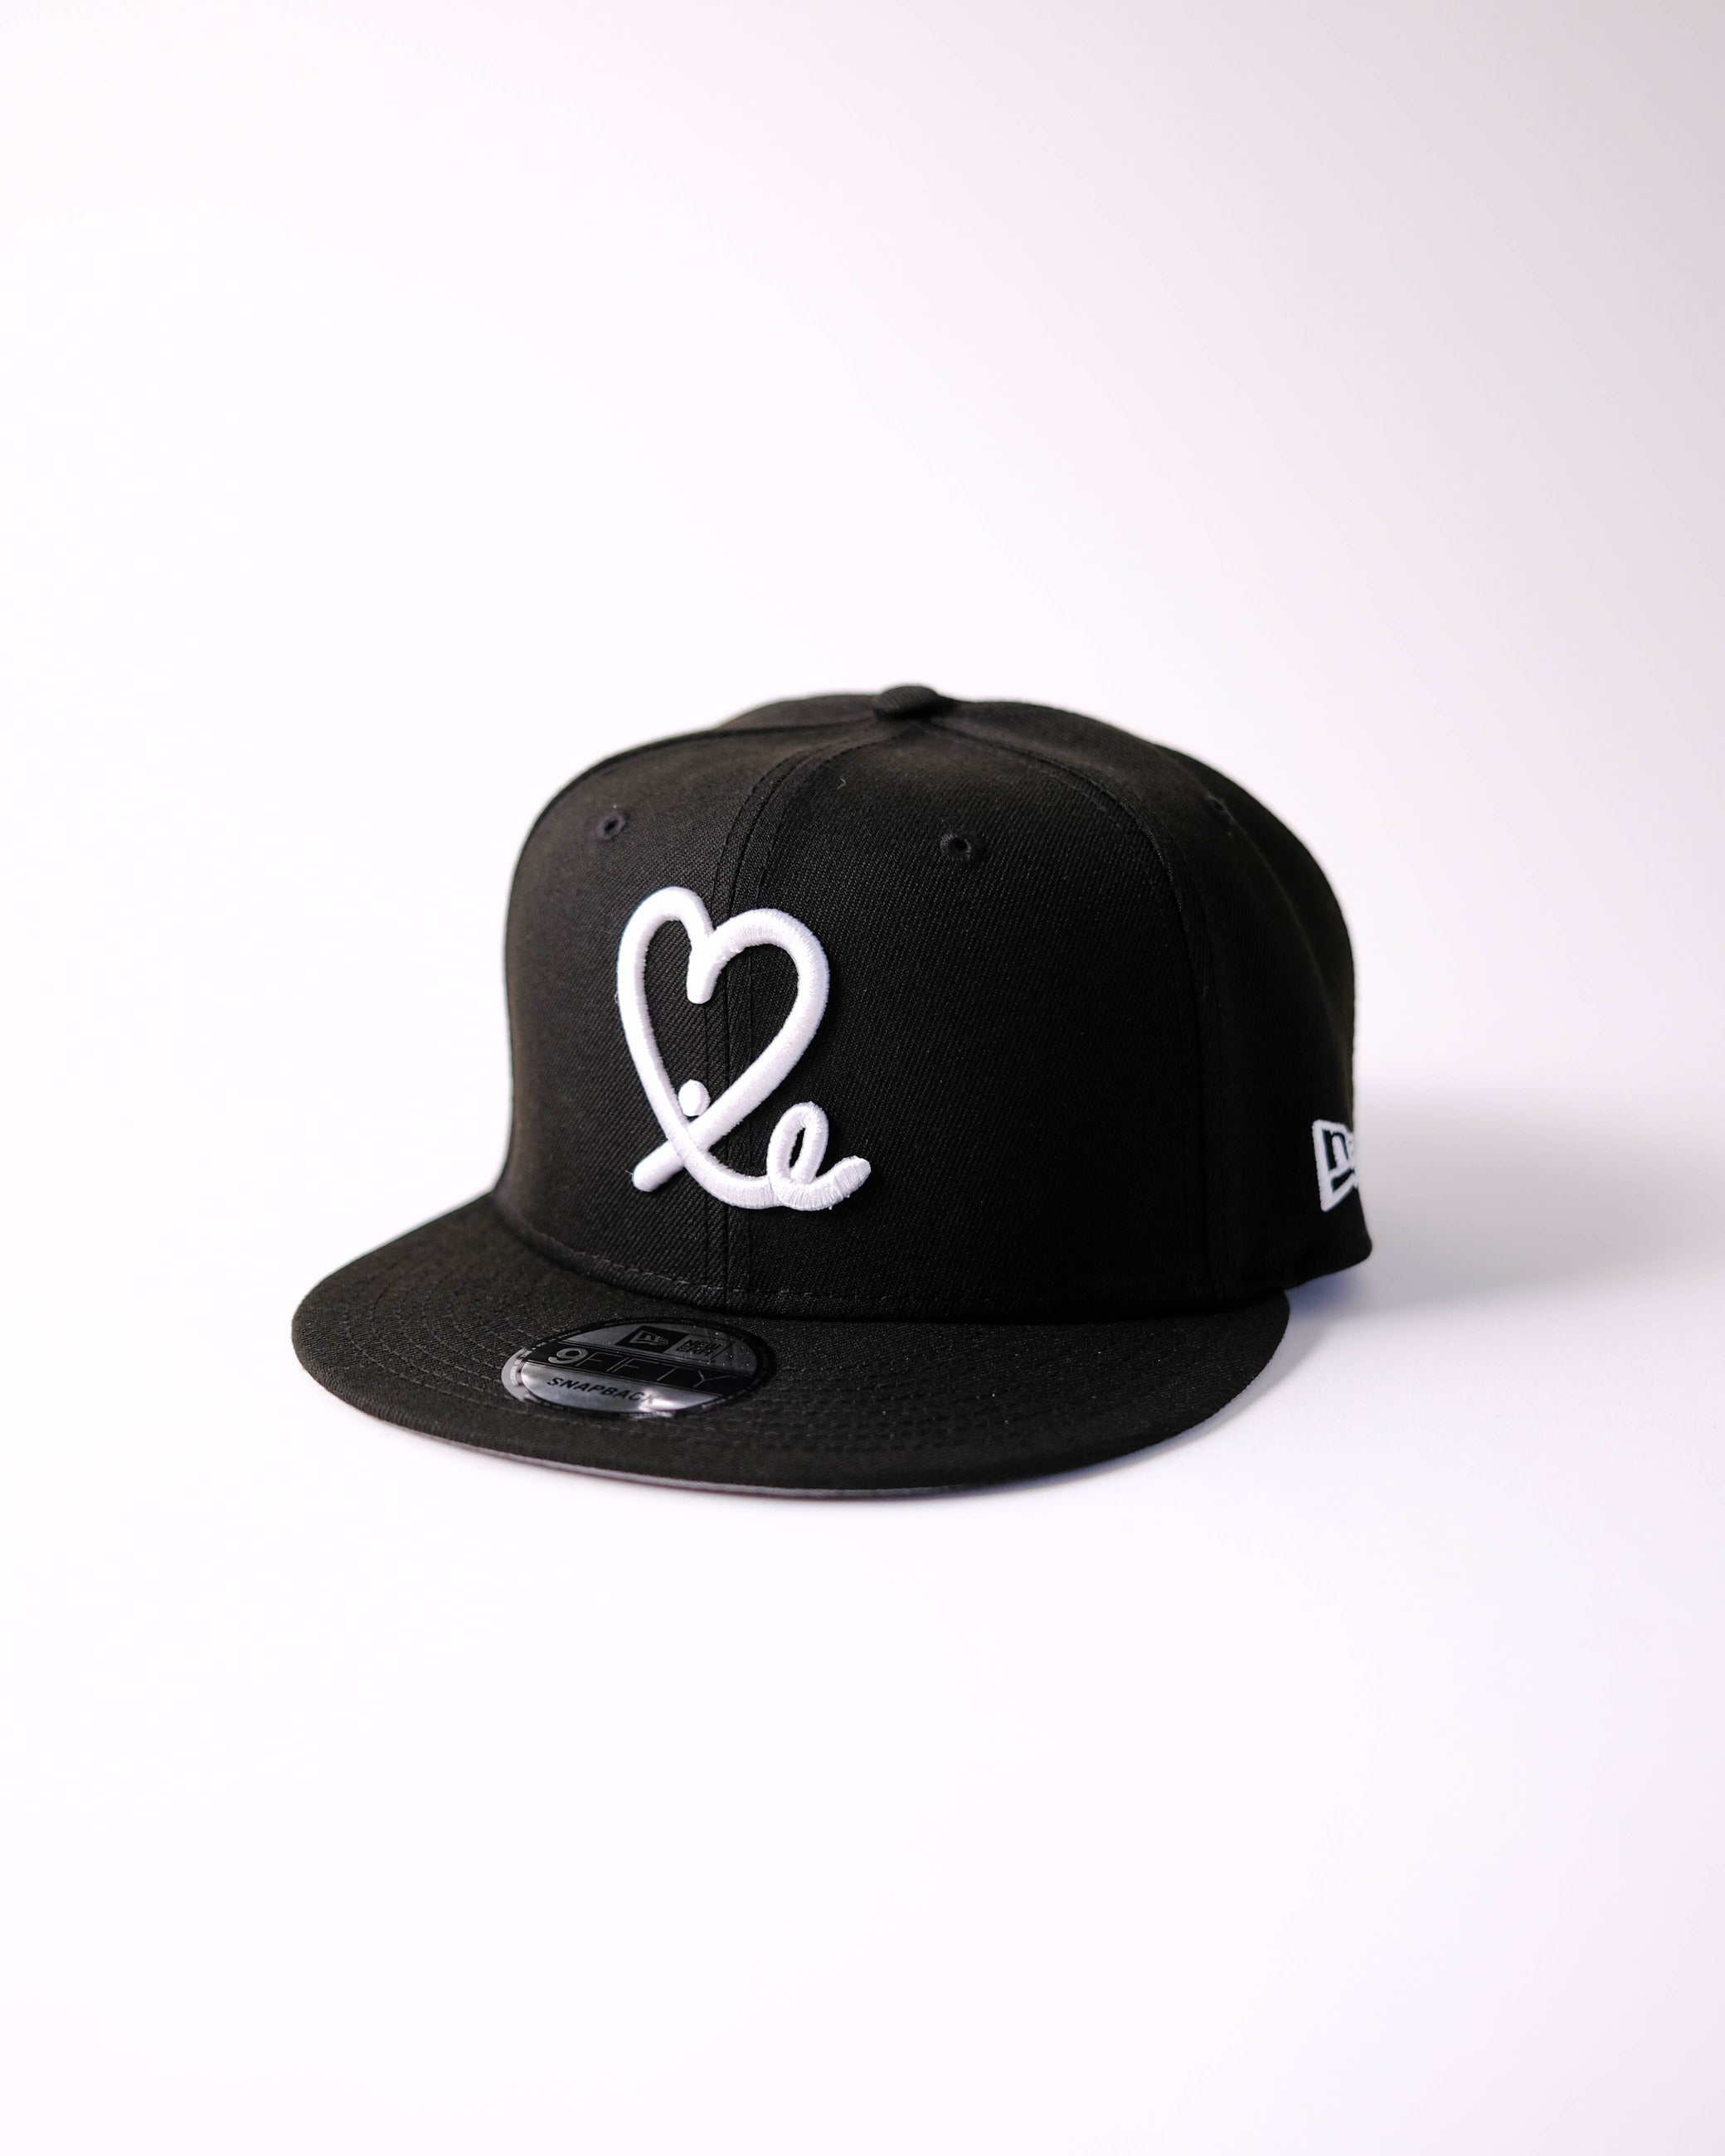 Limited Black / White Mexico Flag 1LoveIE New Era 59FIFTY Fitted Cap